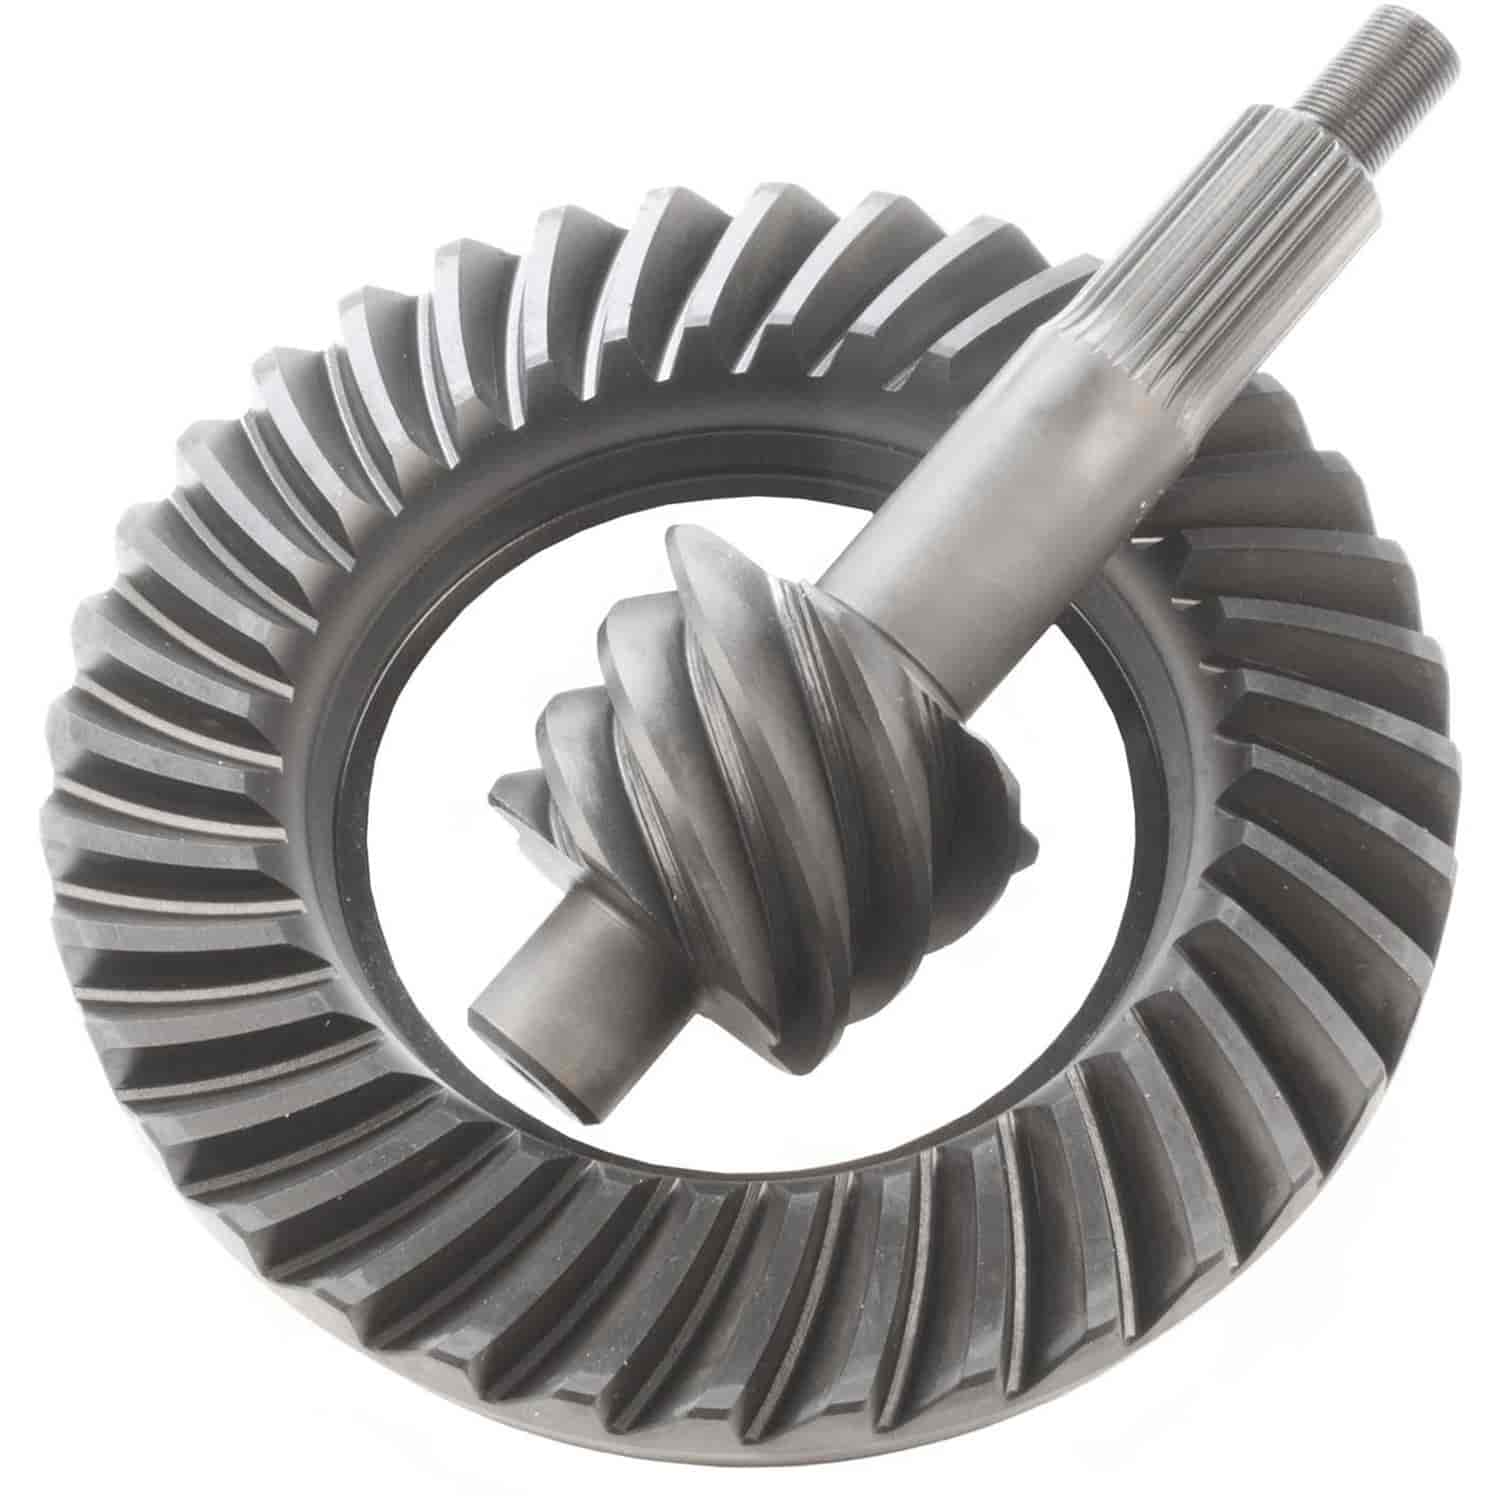 Richmond F9370 Ring and Pinion for Ford 9